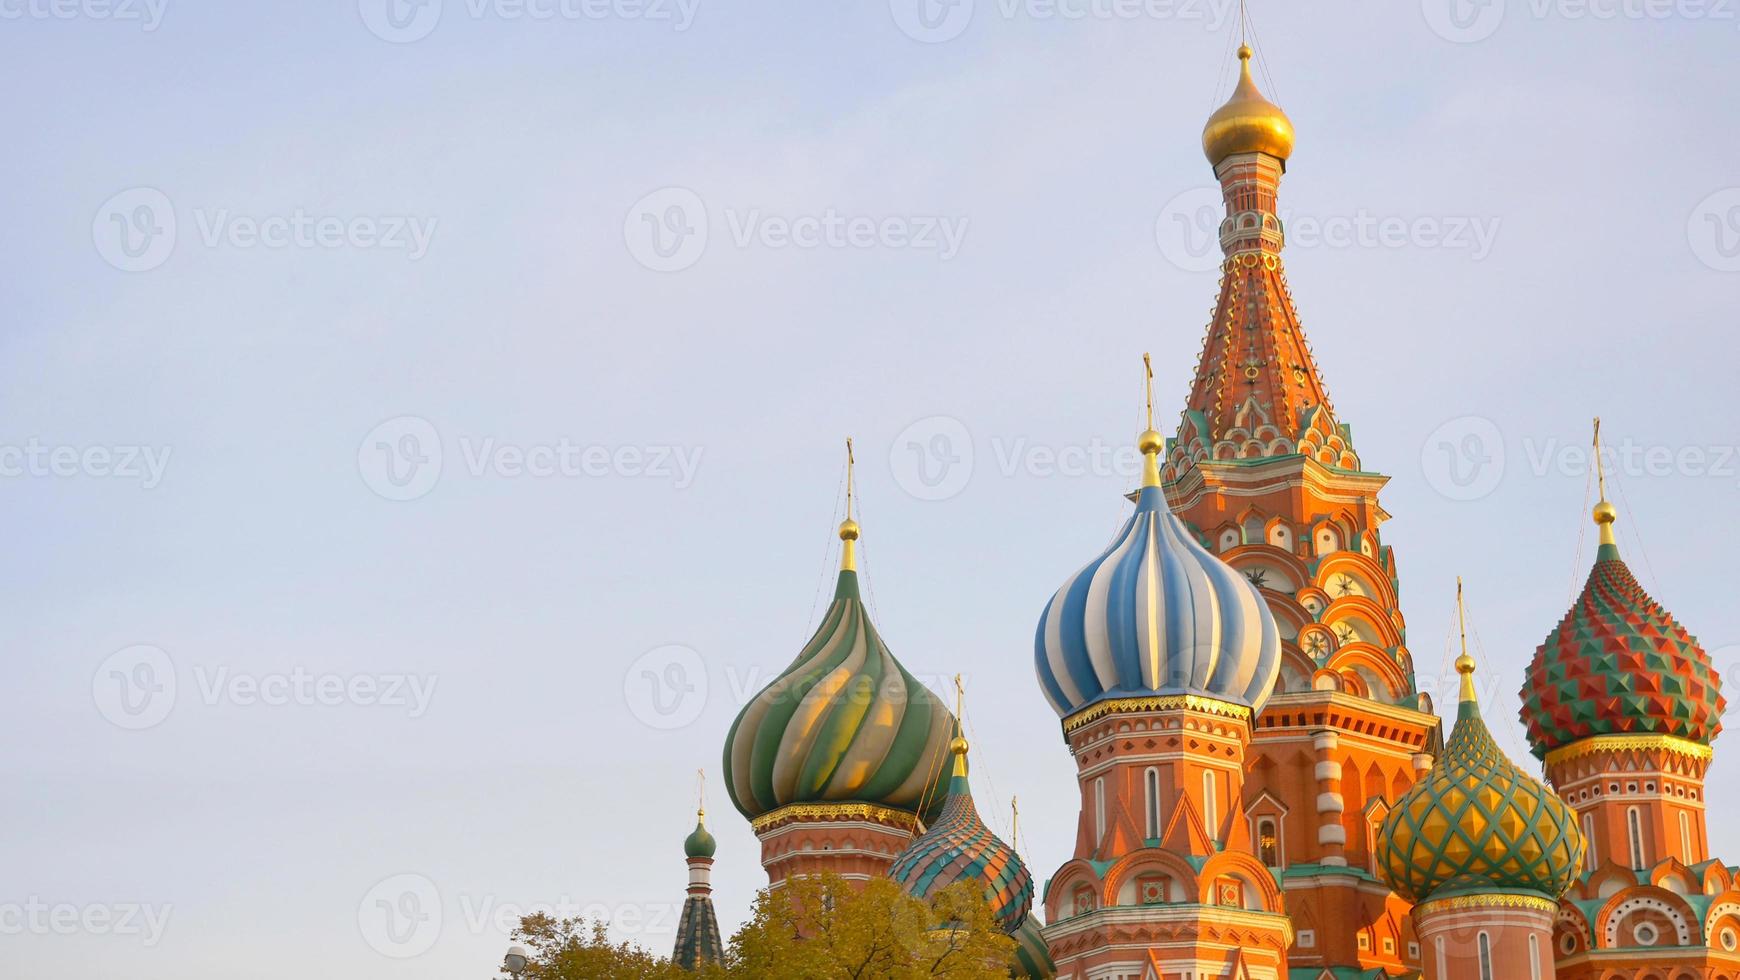 St. Basil's Cathedral in Red Square Moscow Kremlin, Russia photo